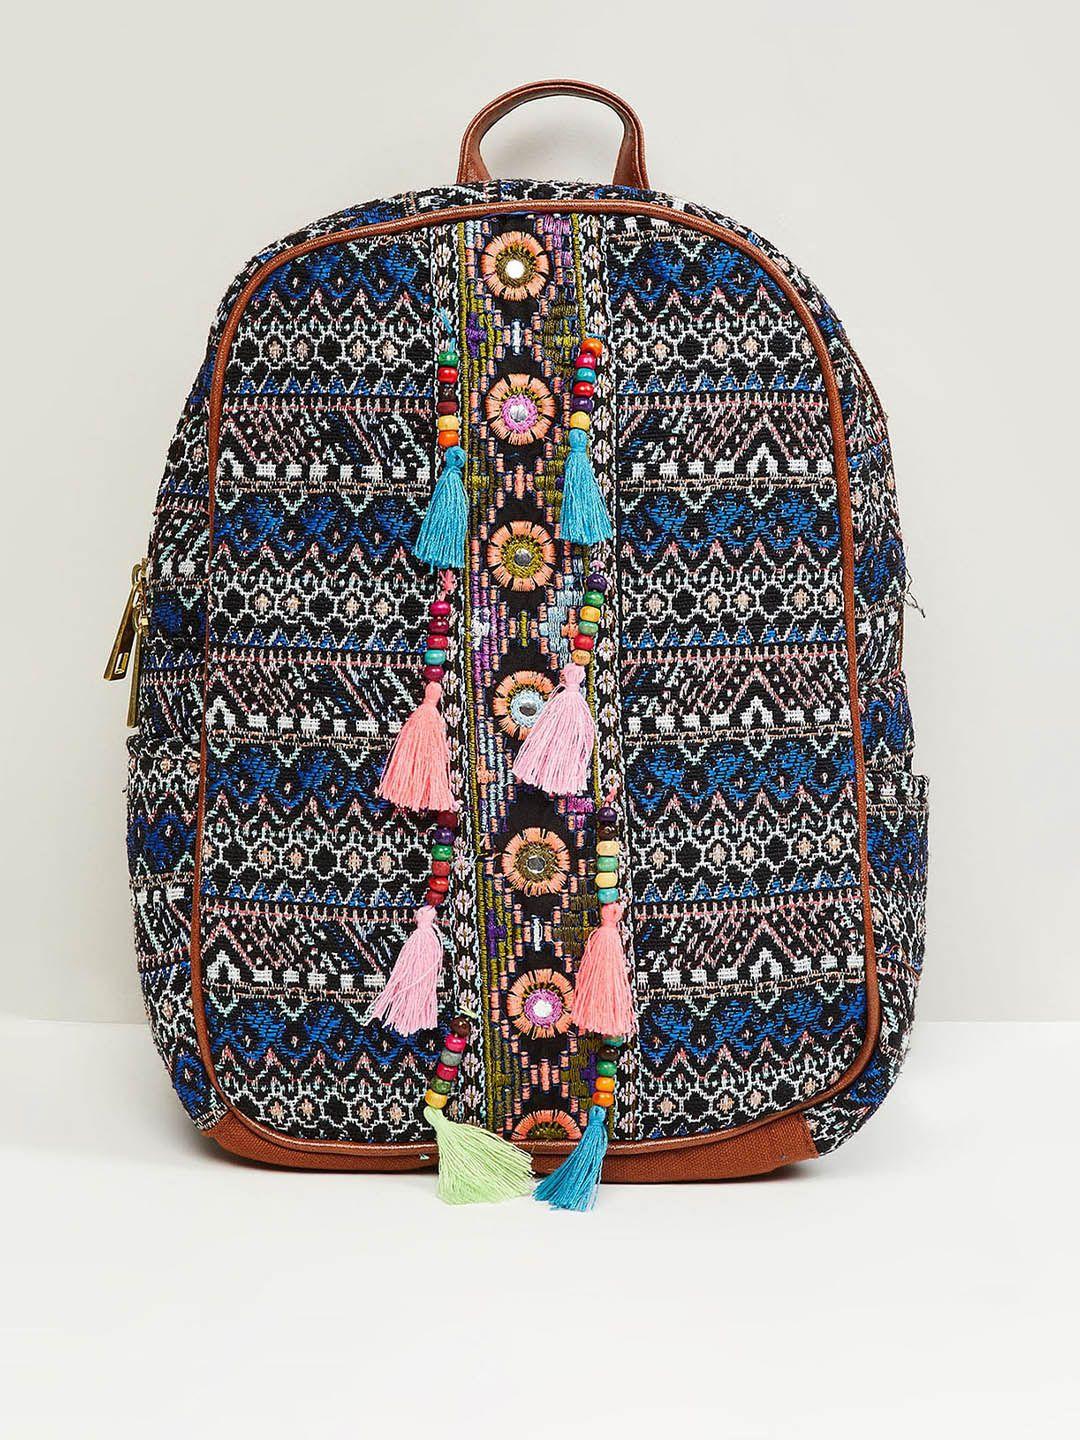 max women embroidered tasselled backpack